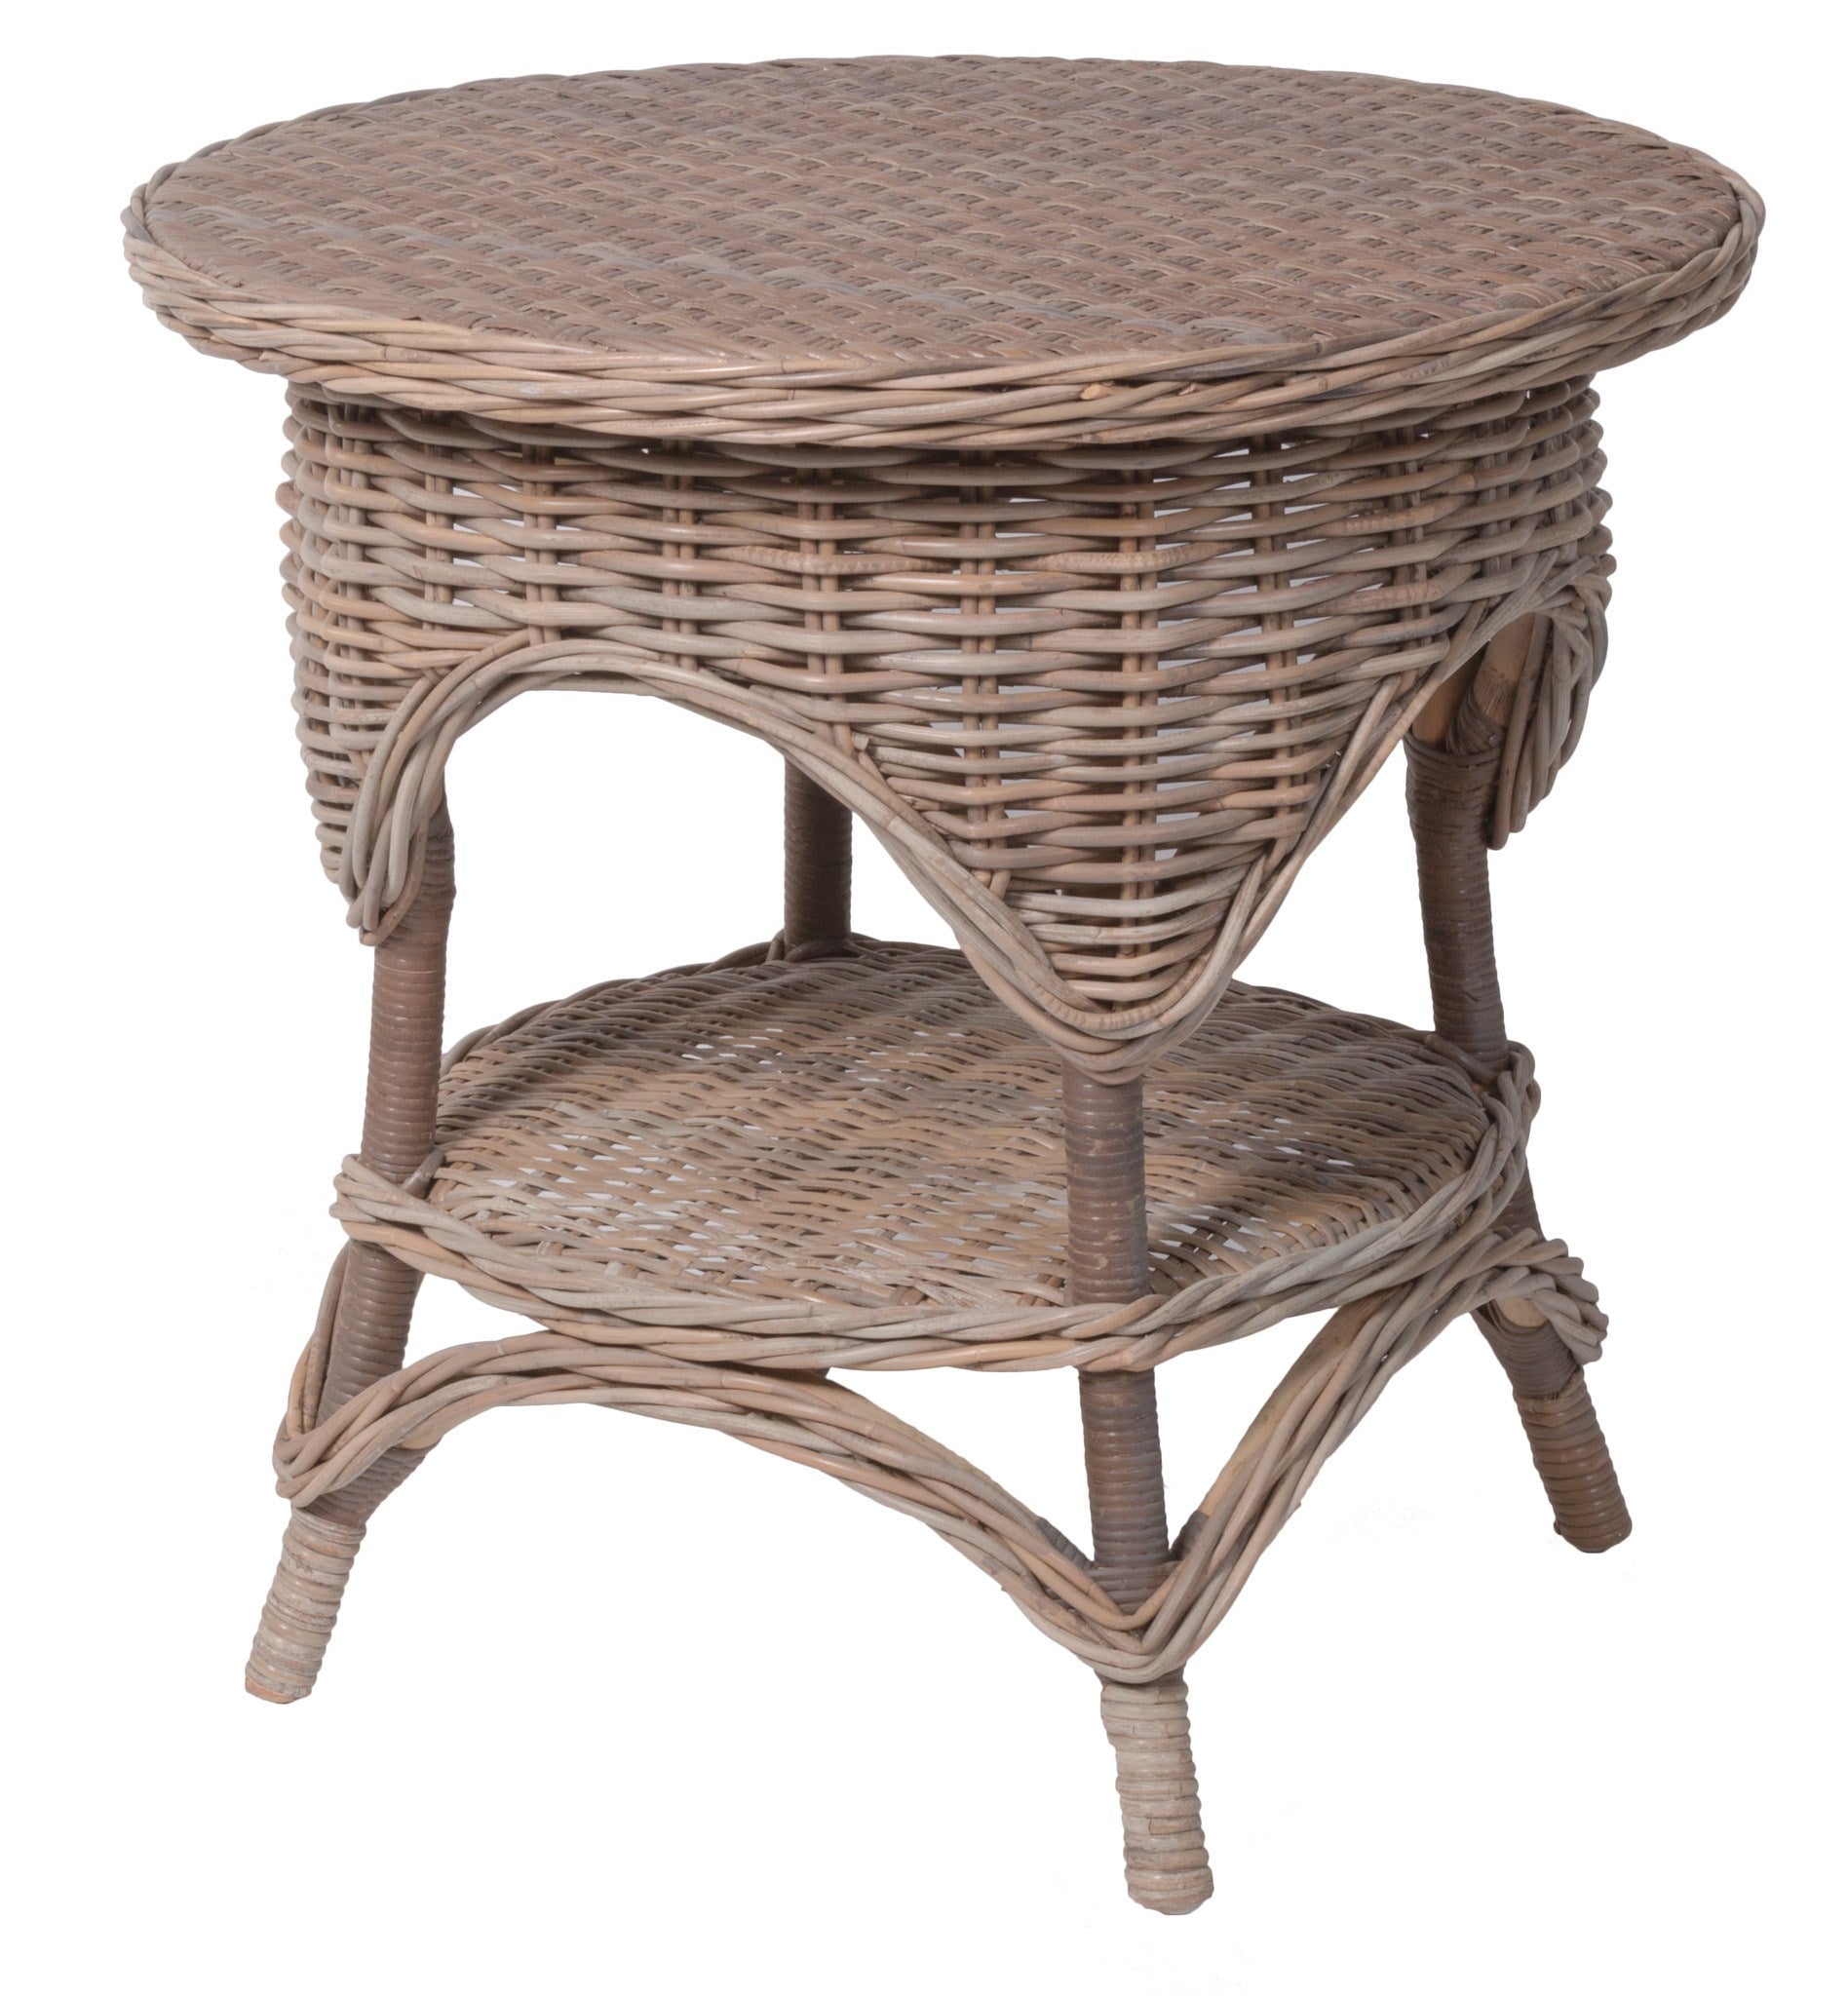 Designer Wicker & Rattan By Tribor Conservatory End Table End Table - Rattan Imports